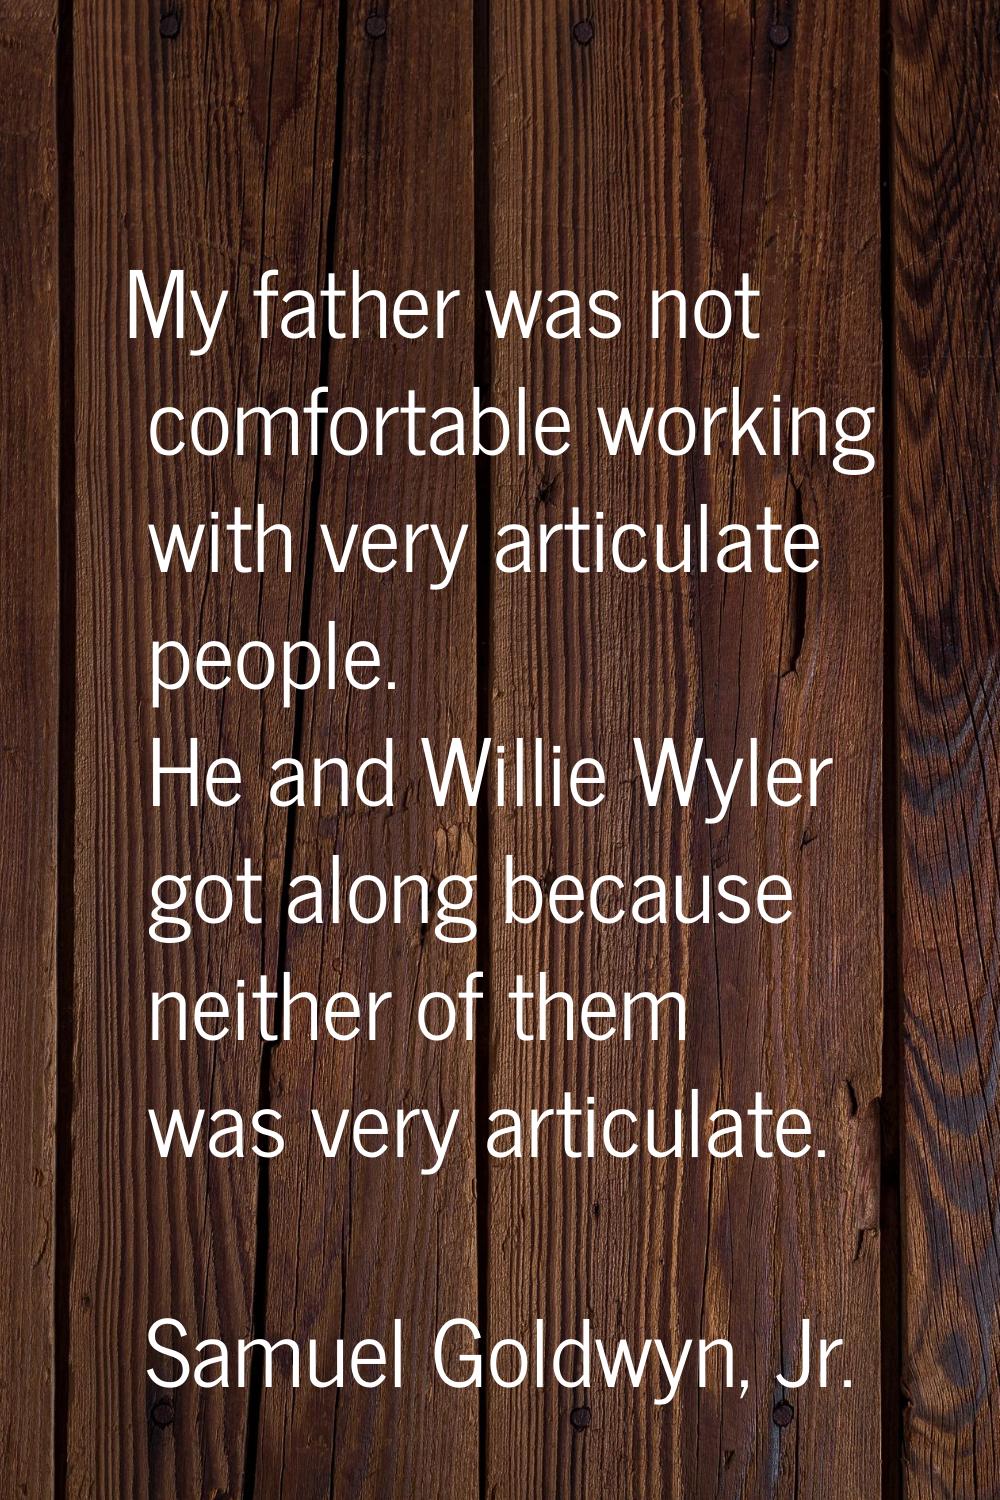 My father was not comfortable working with very articulate people. He and Willie Wyler got along be